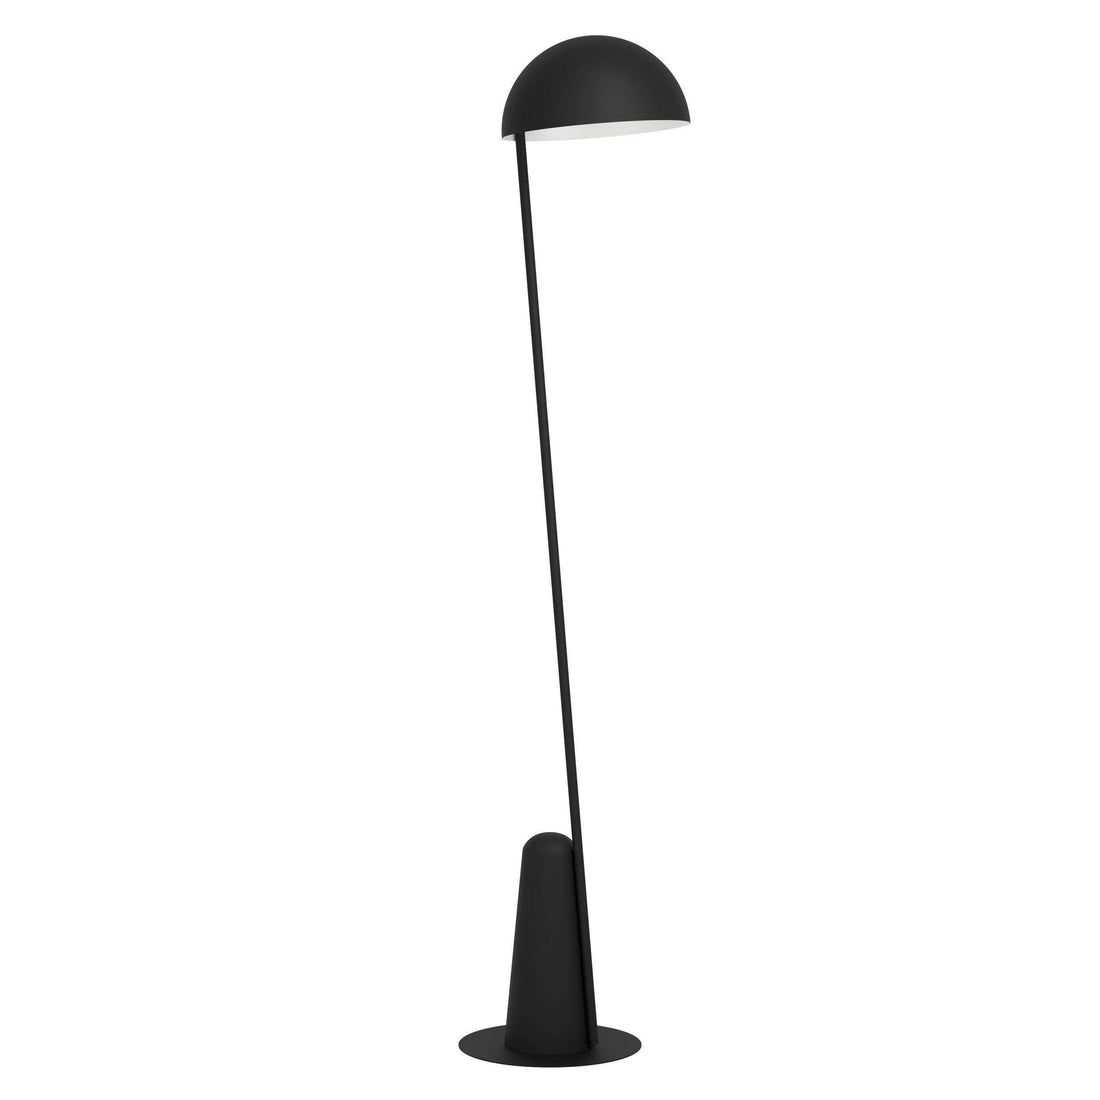 ARANZOLA Floor Lamp by The Light Library